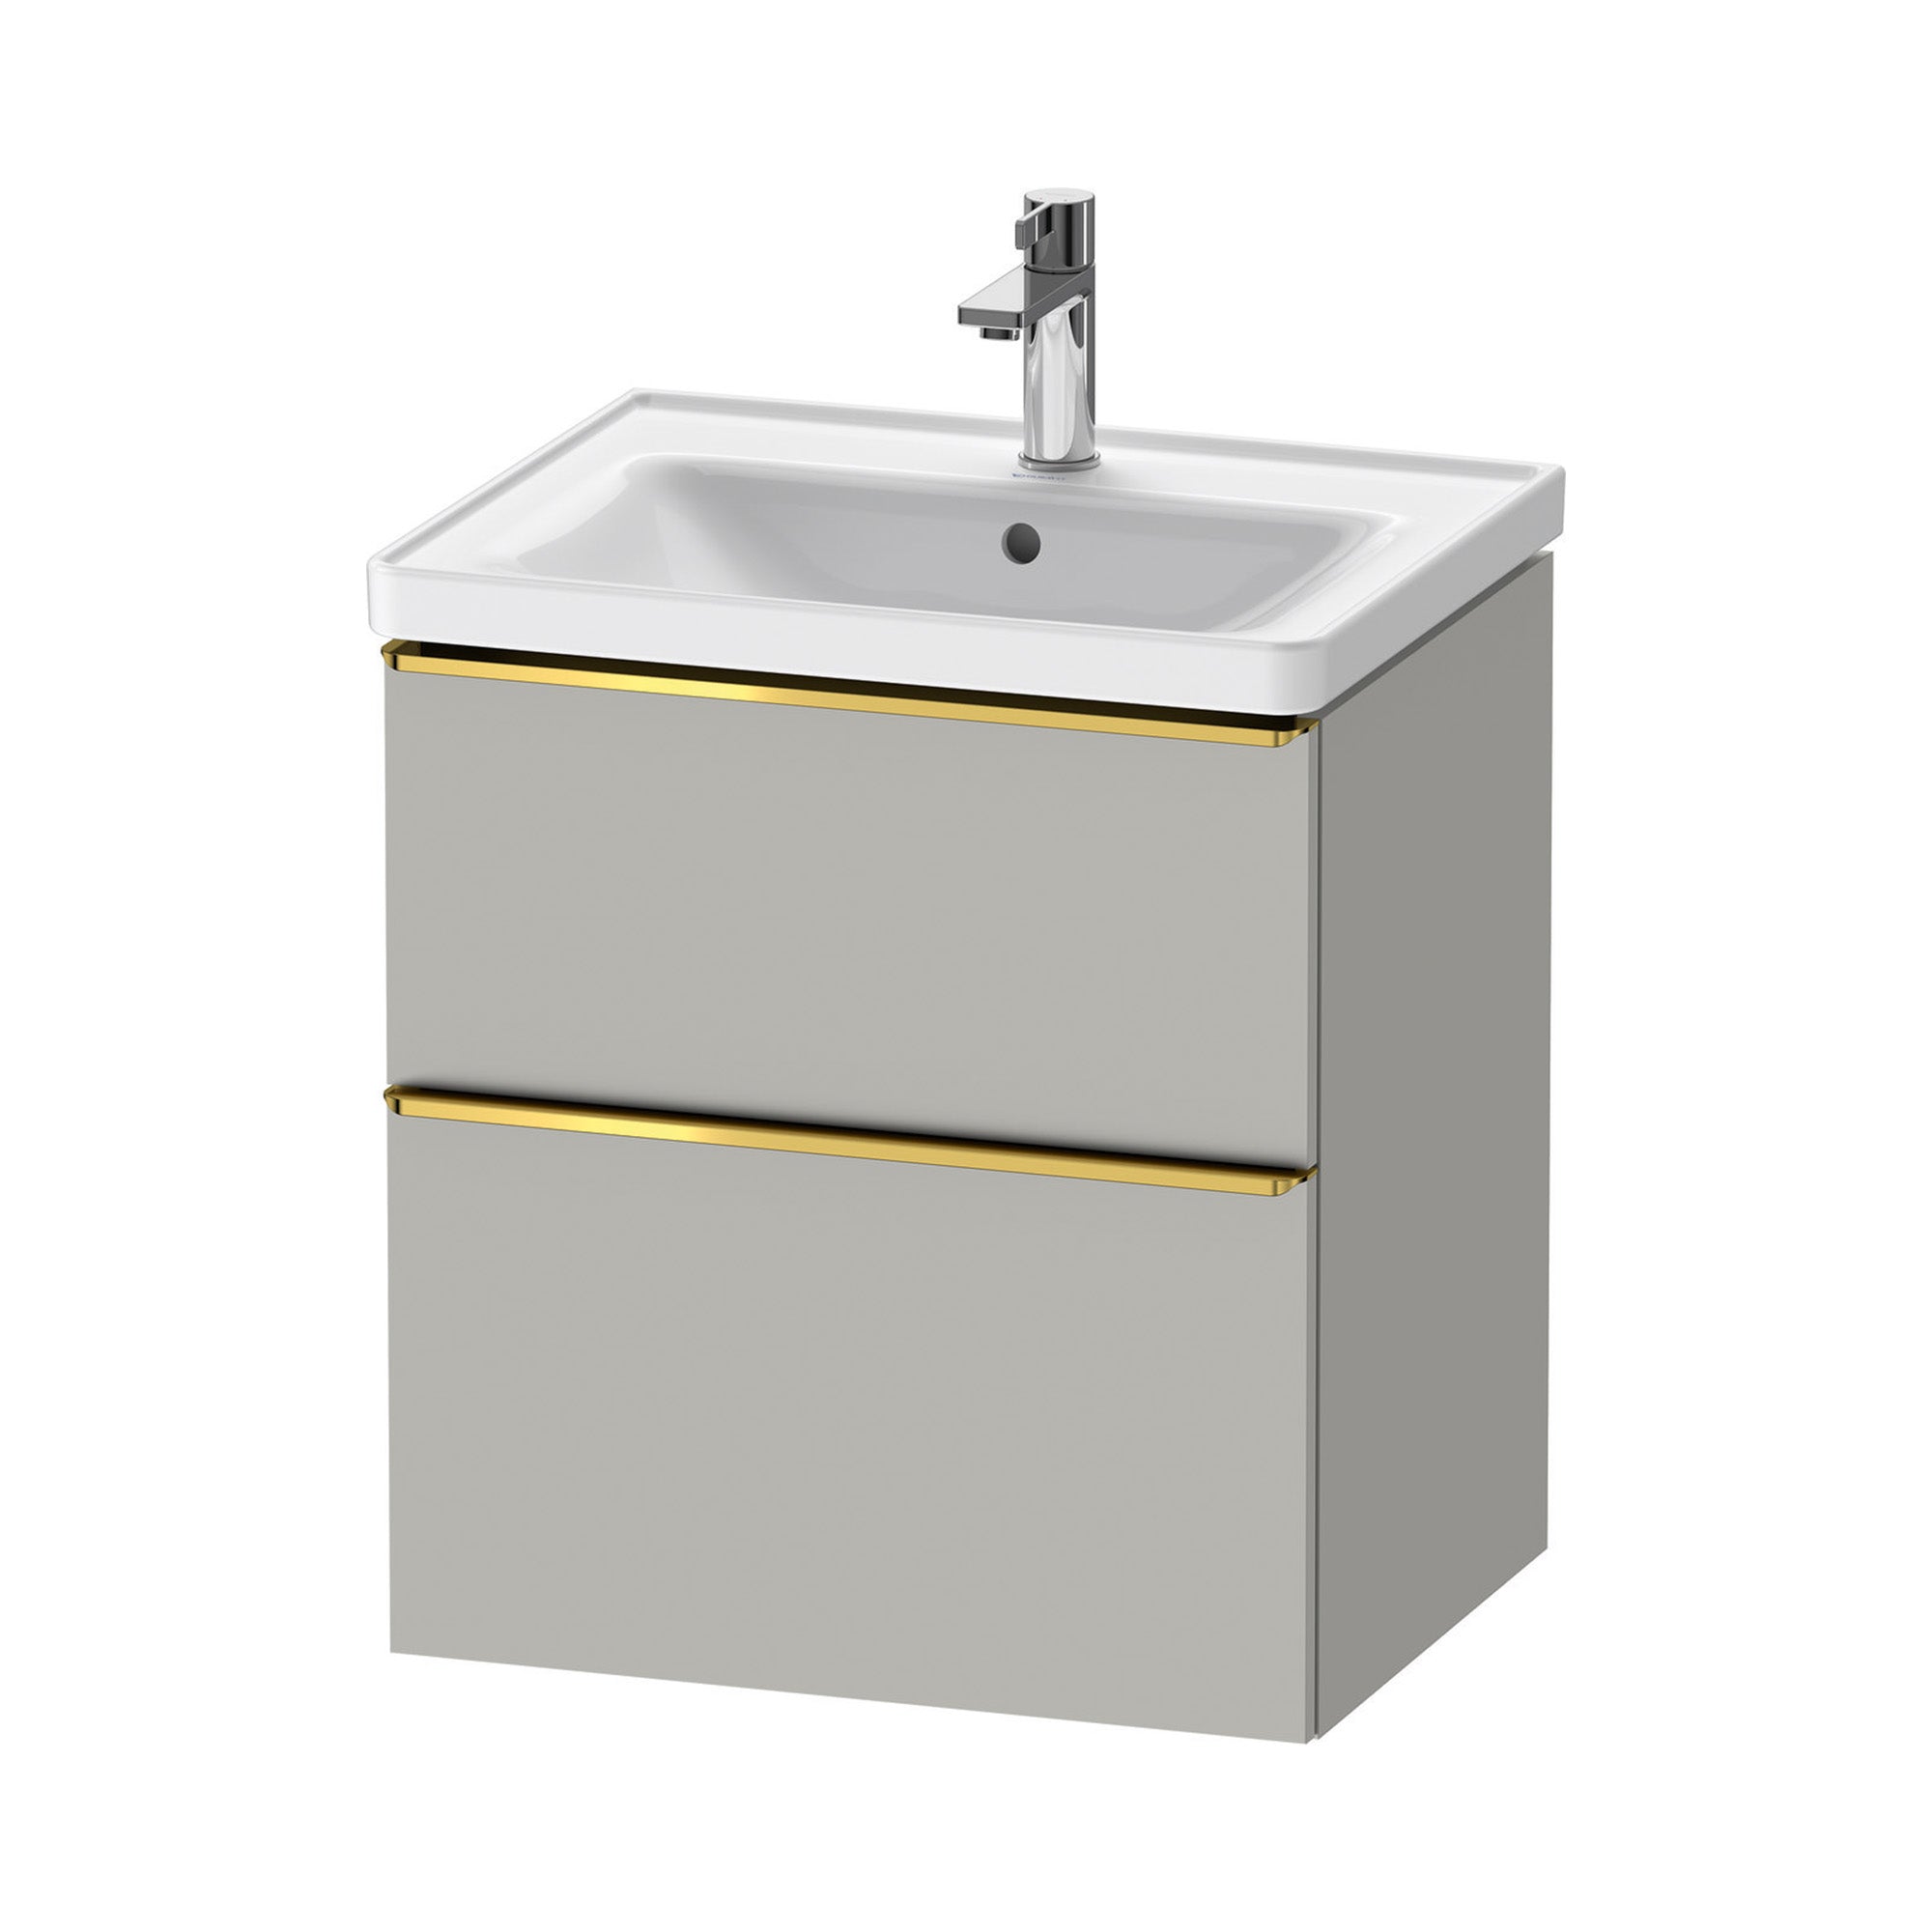 duravit d-neo 600 wall mounted vanity unit with d-neo basin concrete grey gold handles